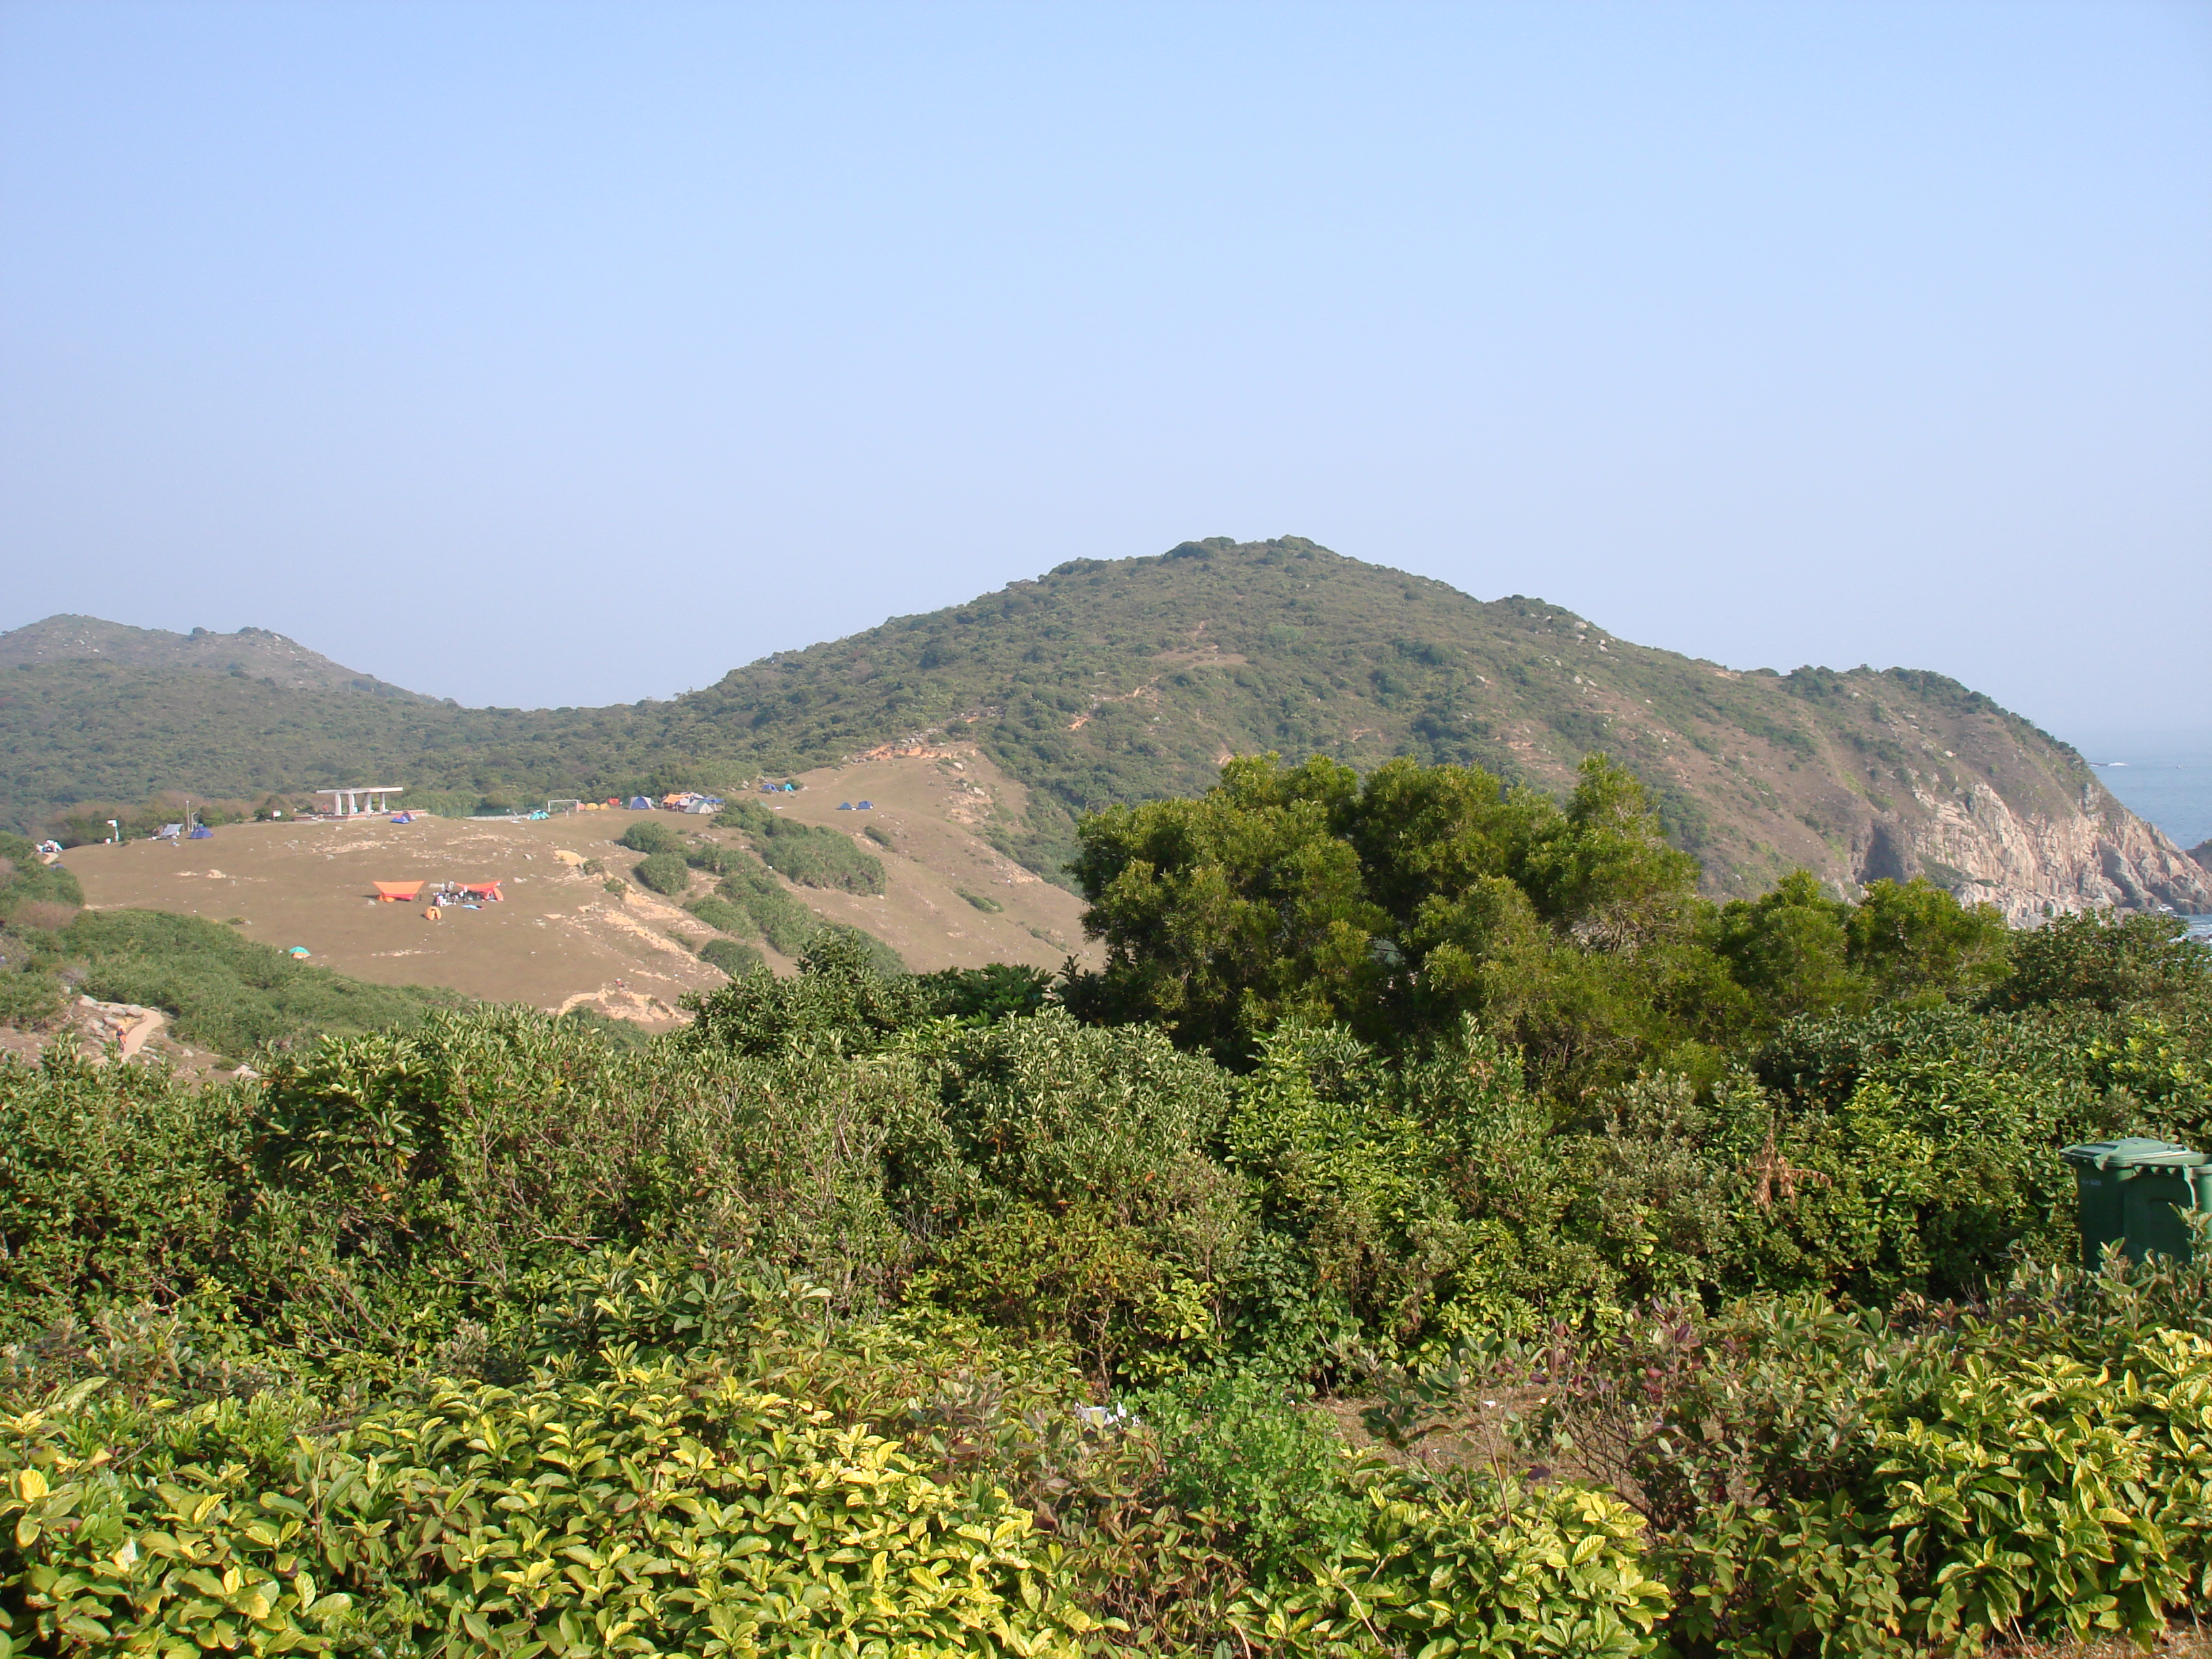 File:View from a hilltop in Tap Mun.jpg - Wikimedia Commons